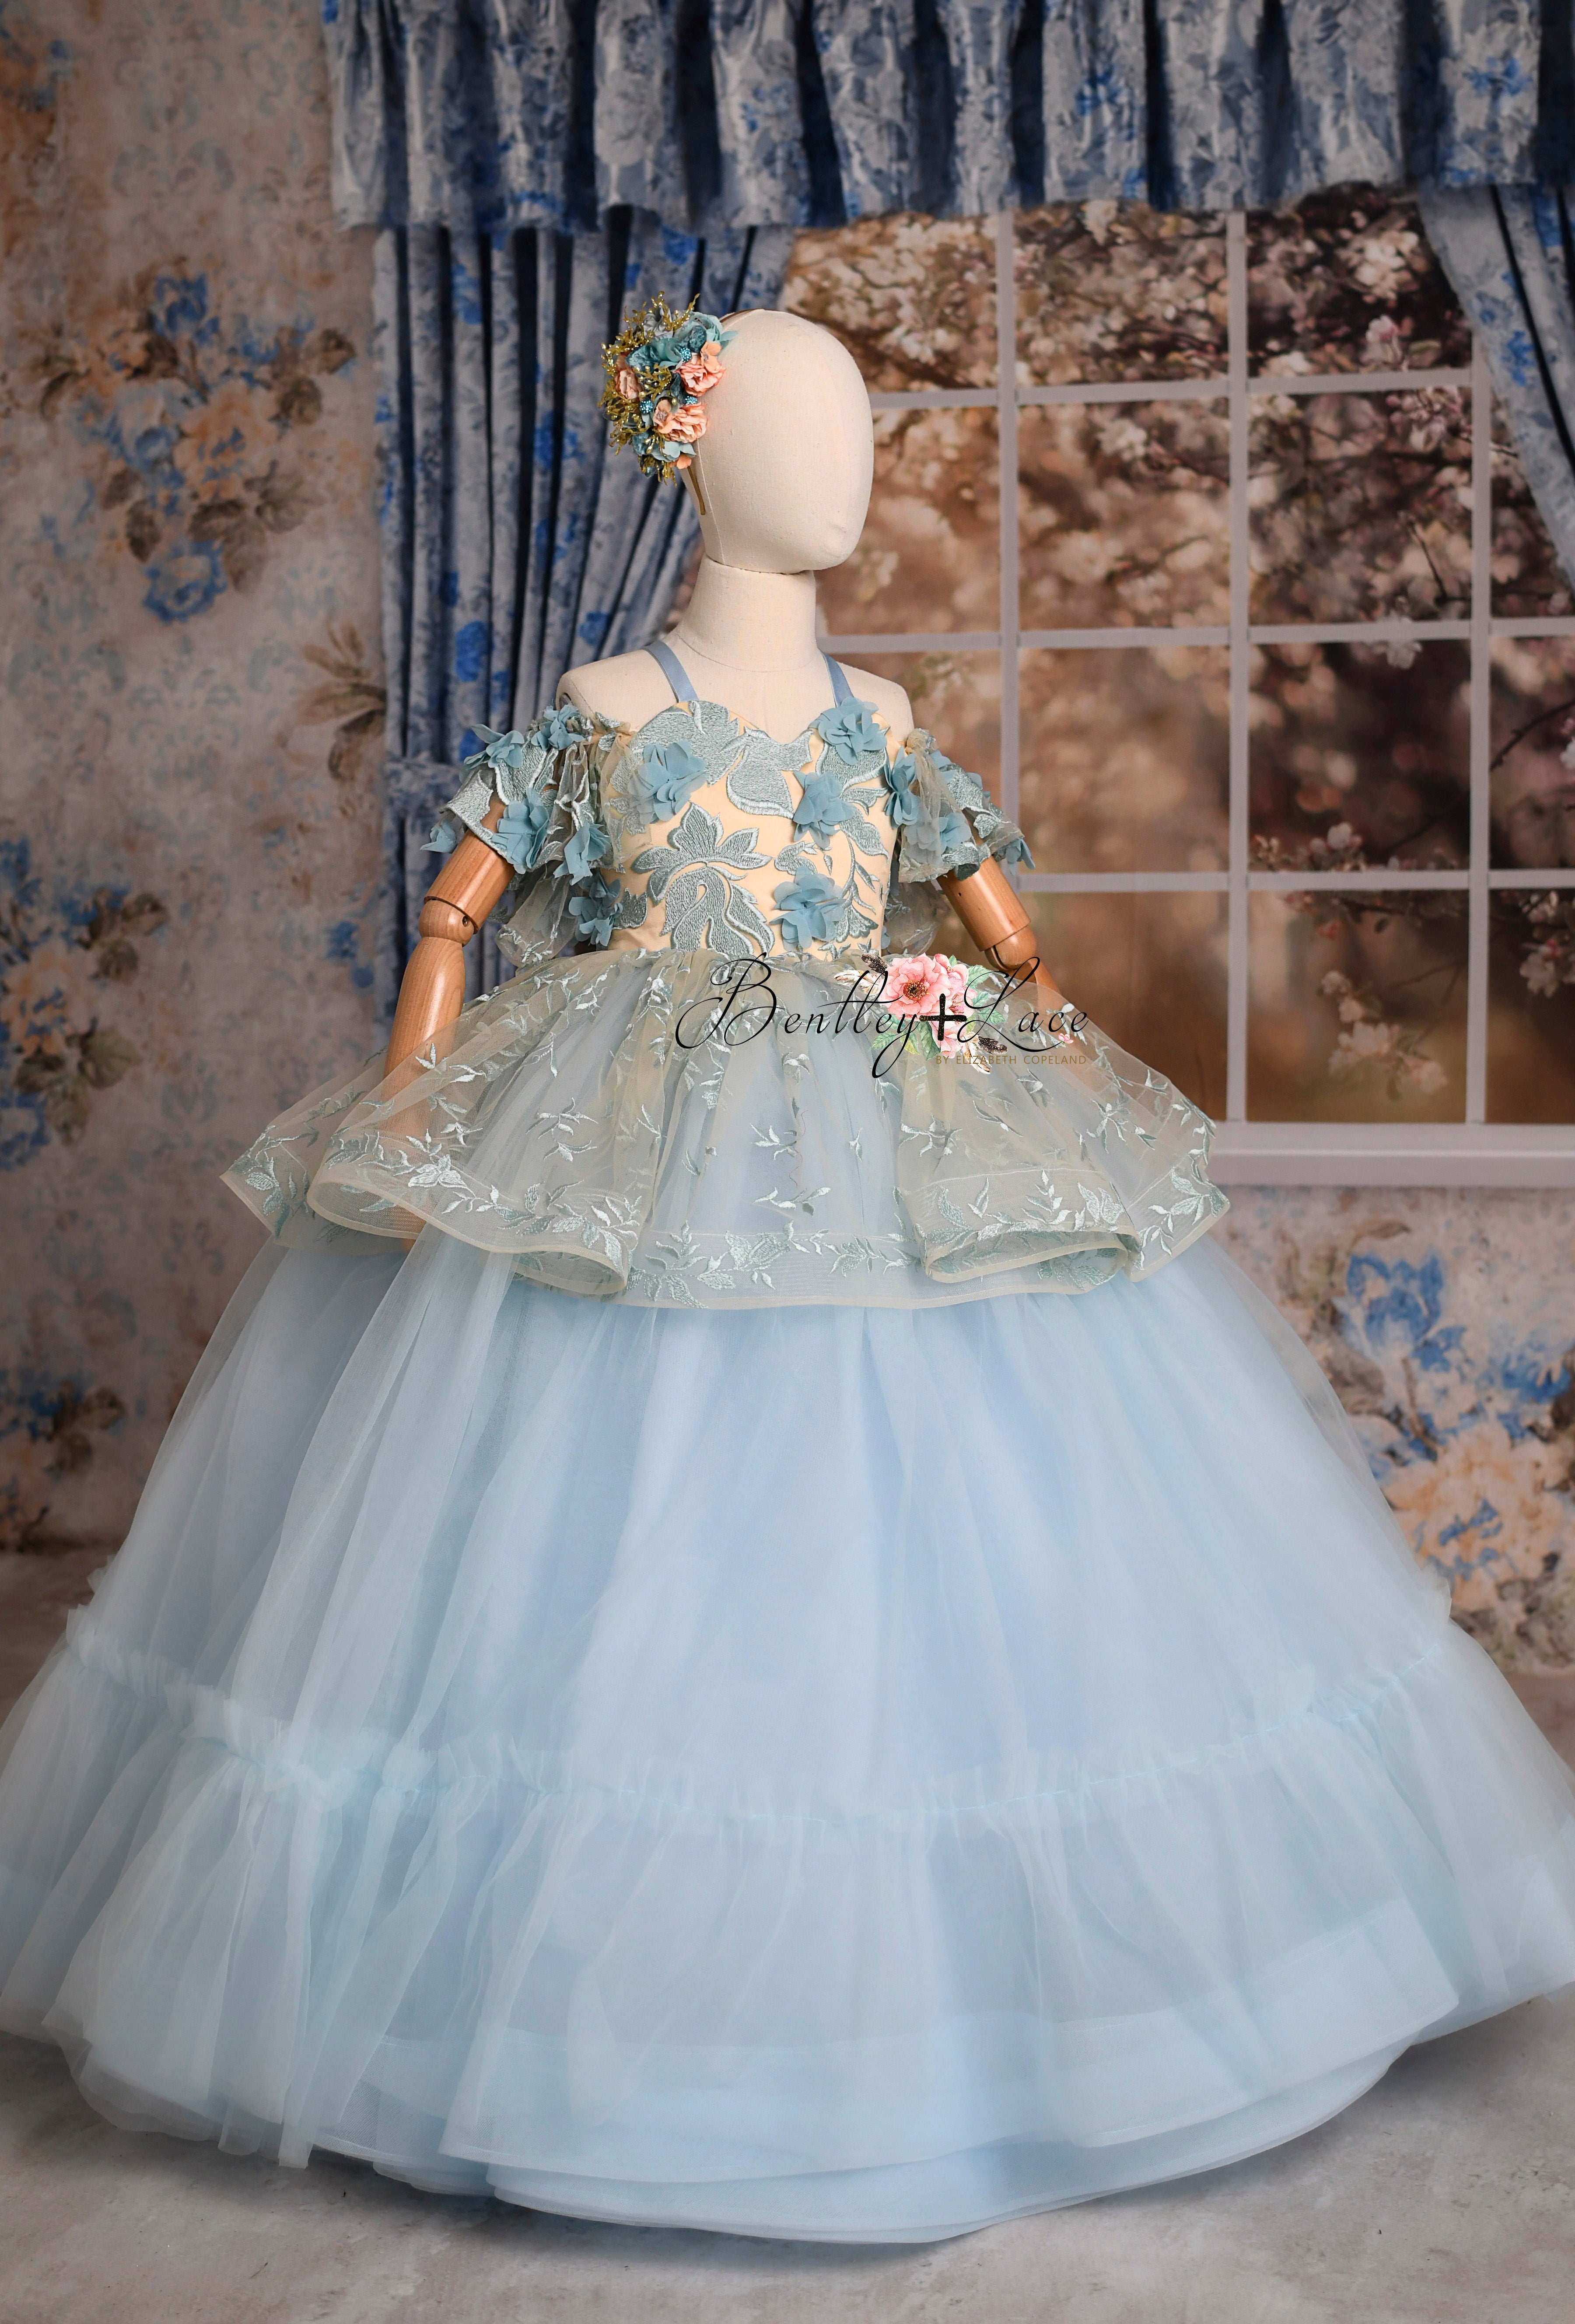 Couture rental gowns for tiny fashionistas